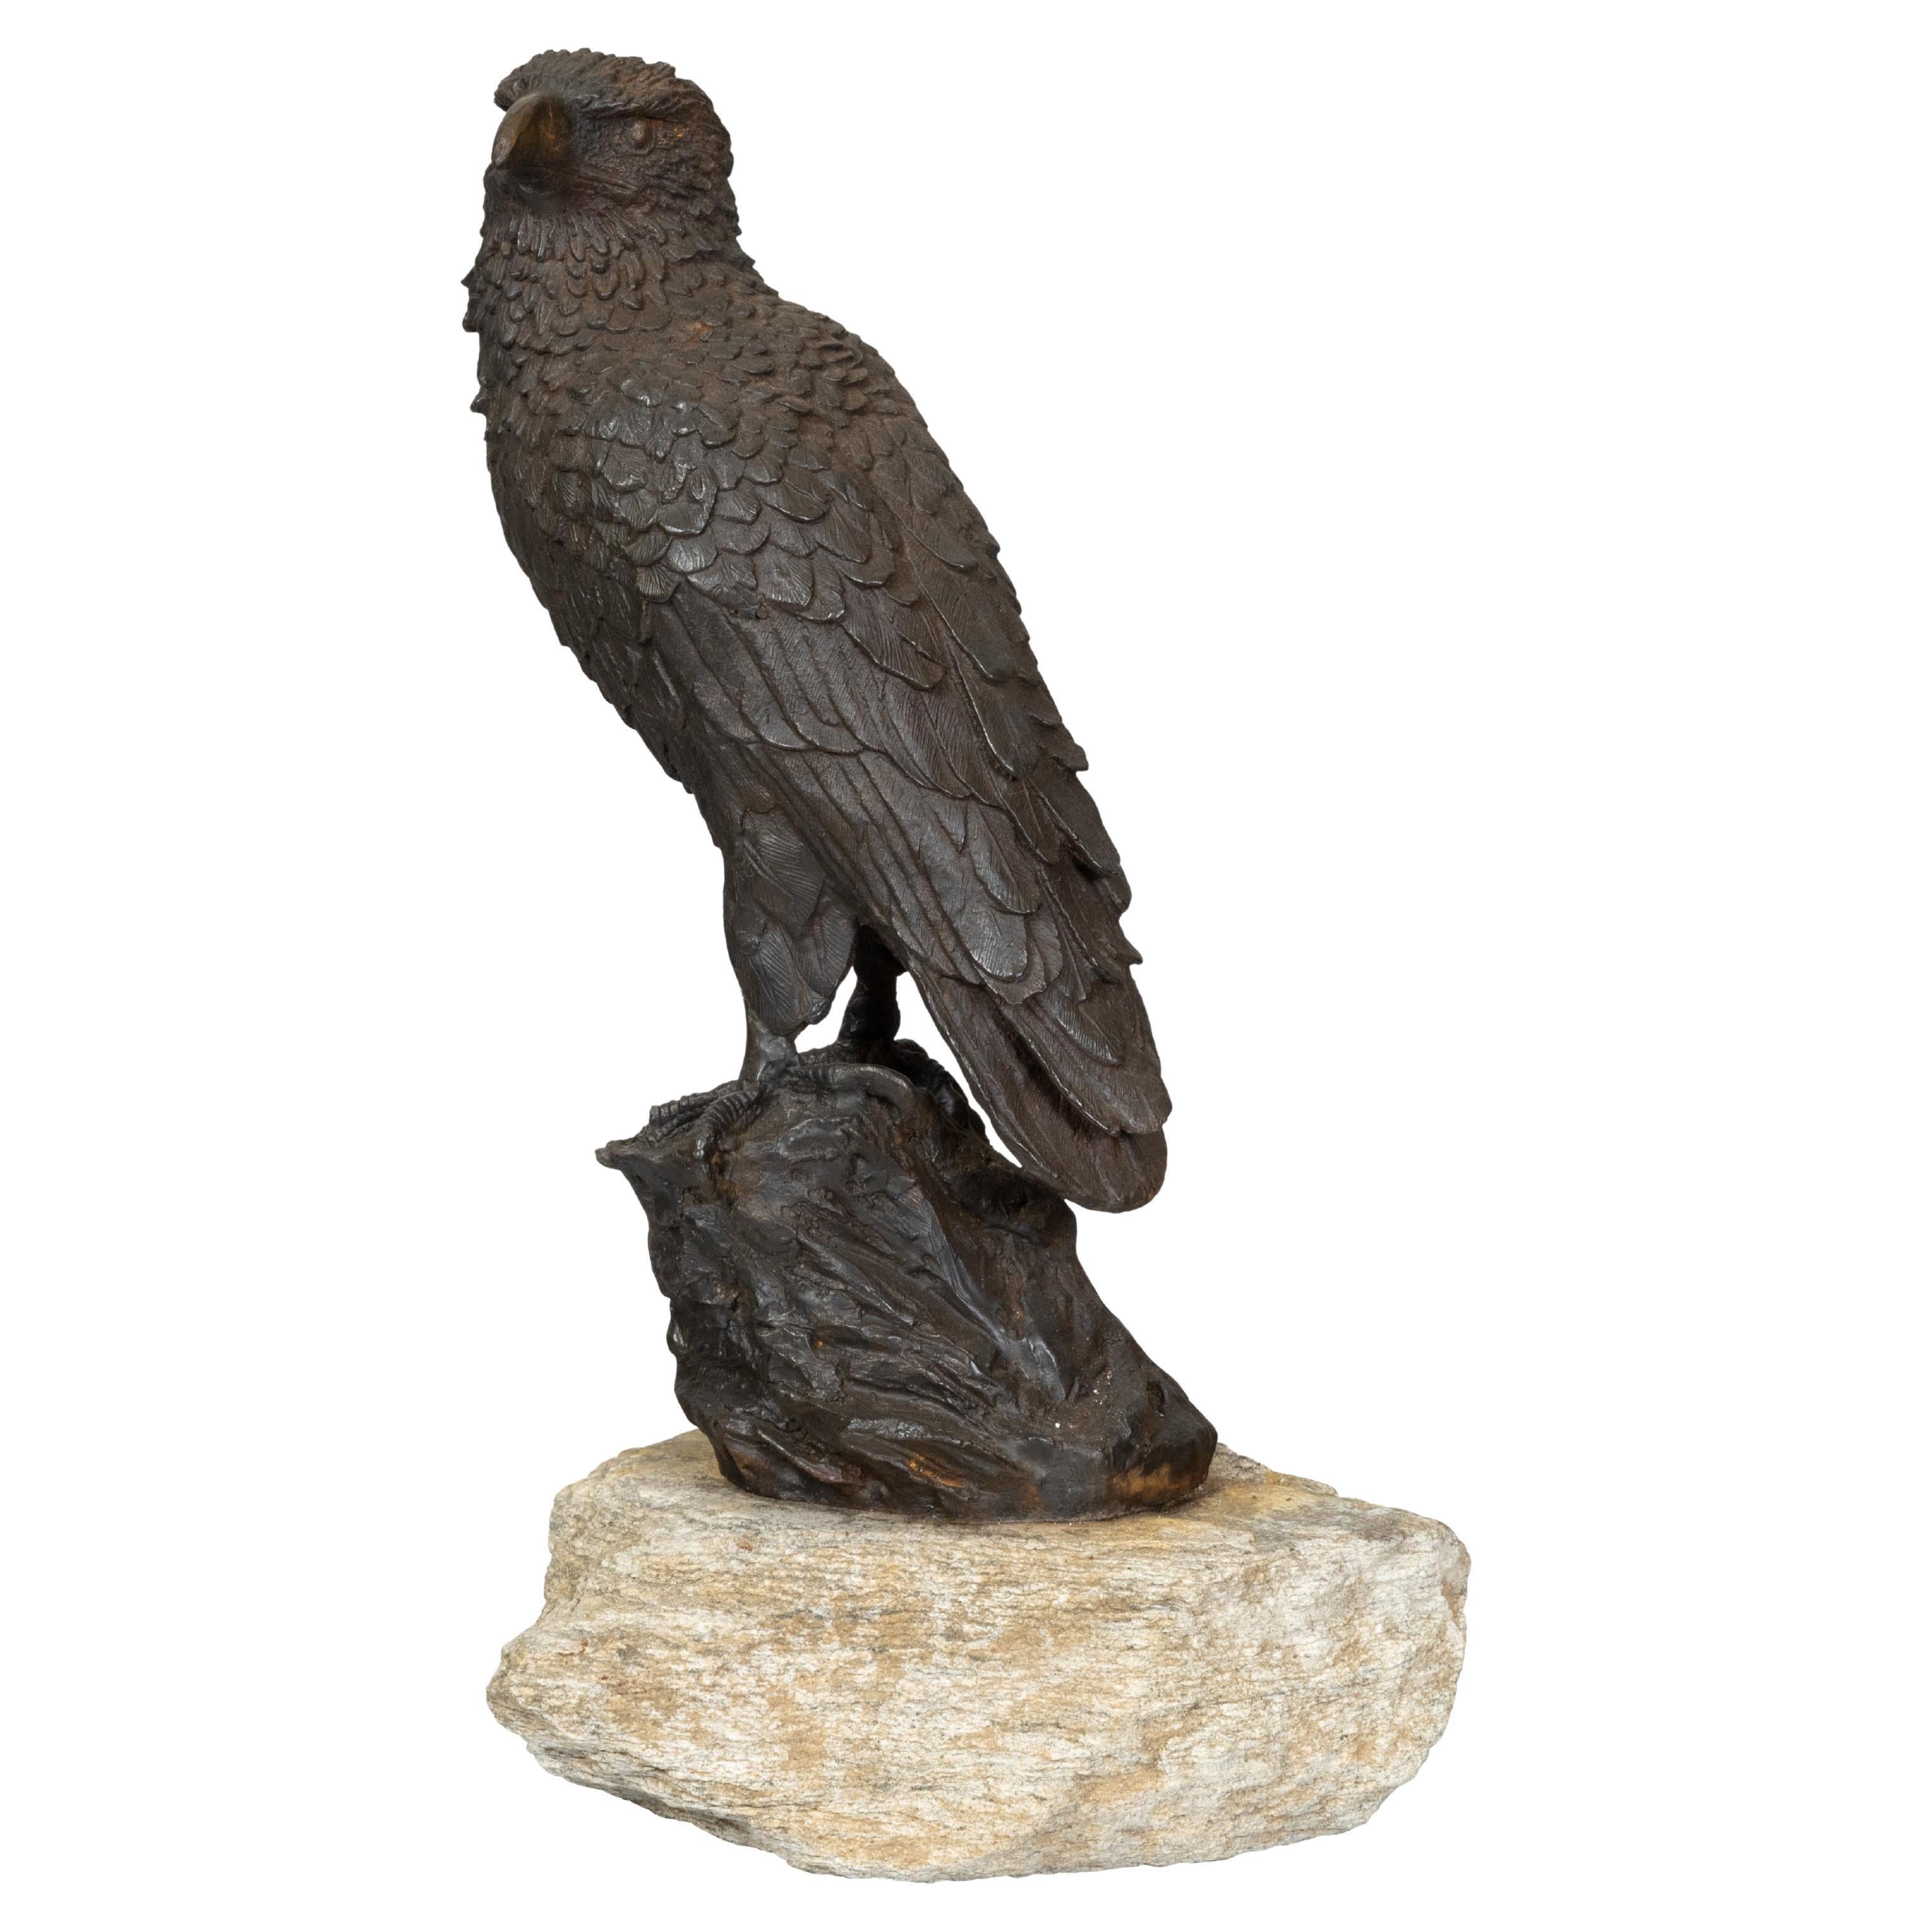 English Turn of the Century Iron Sculpture of an Eagle Perched on a Rock